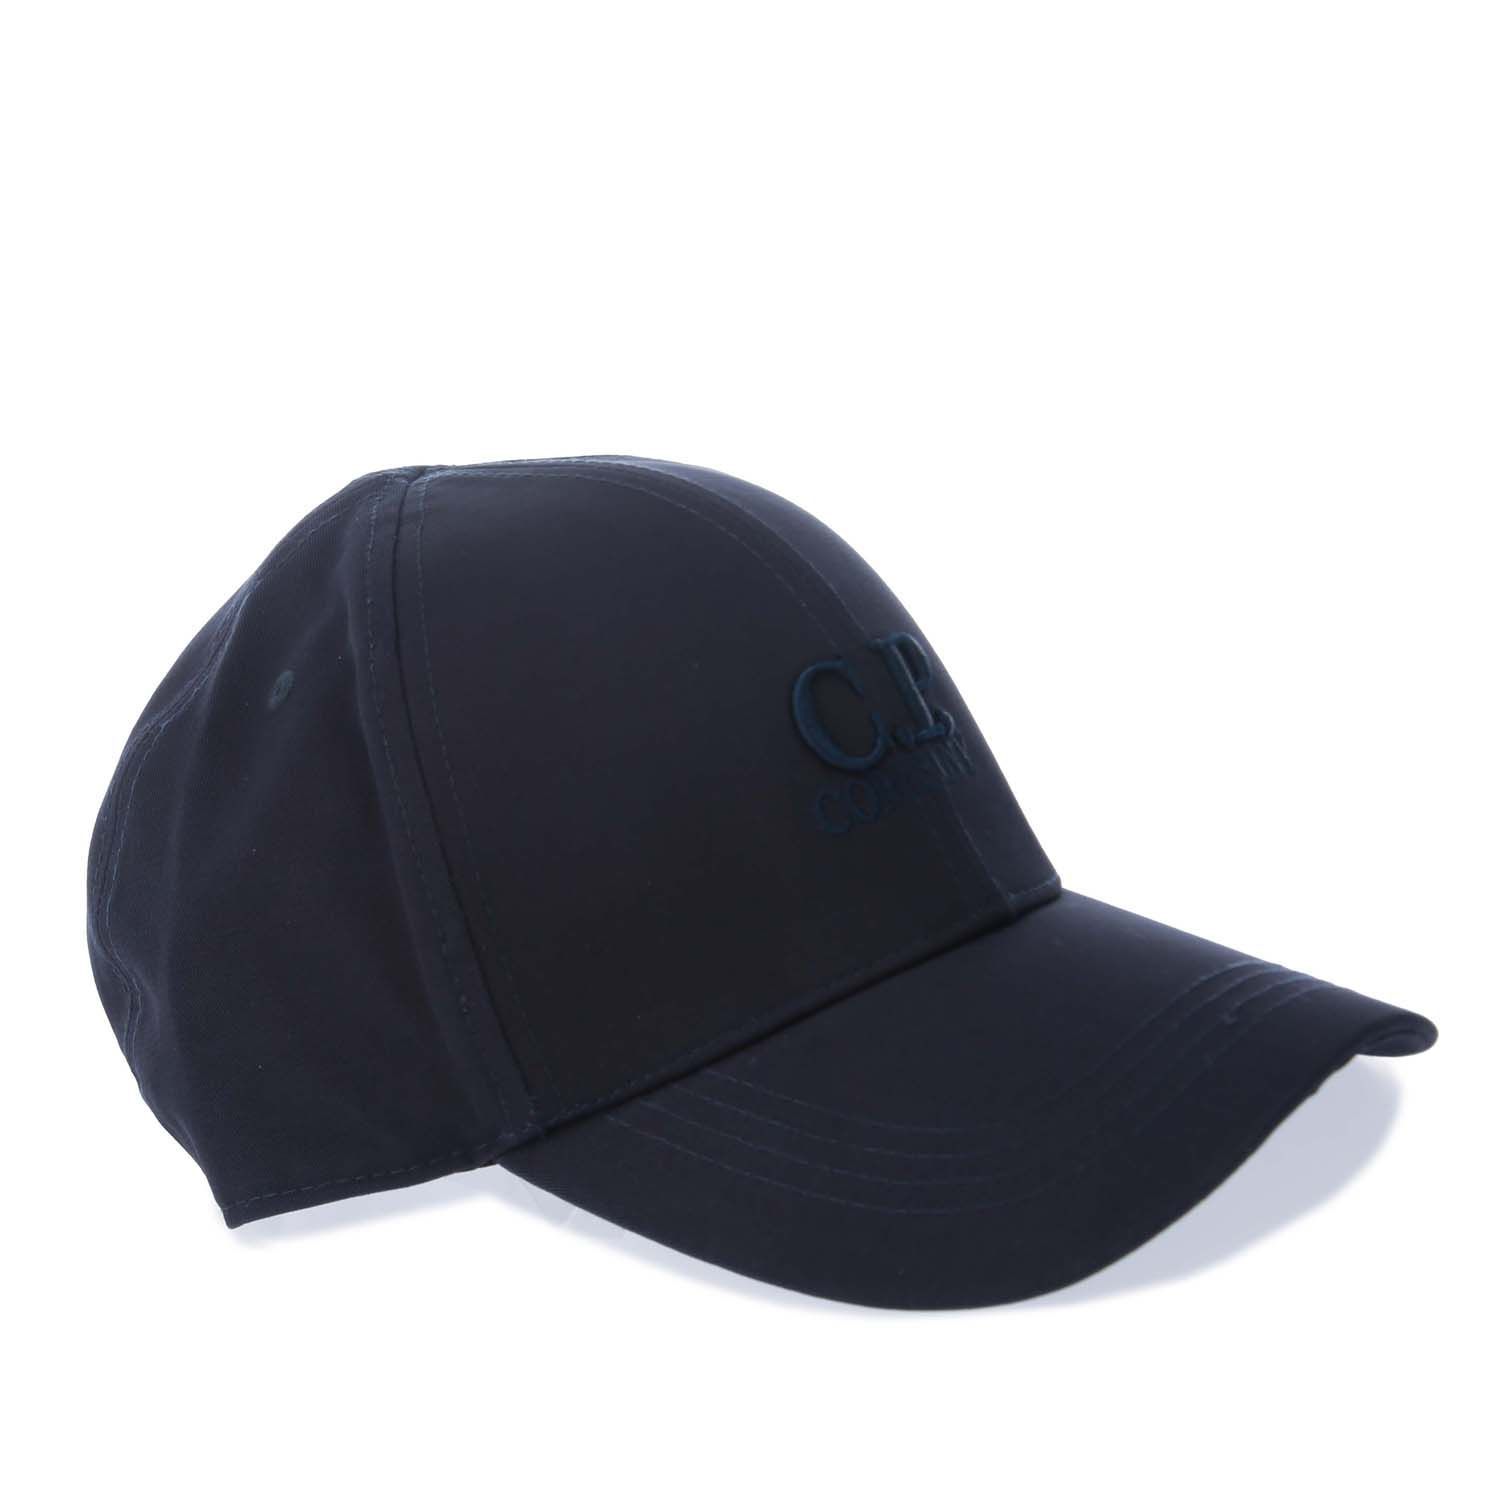 Mens C.P. Company Logo Cap in navy.- Adjustable strap.- 6 panel construction.- Peak and the brands signature logo embroidered to the centre front.- Cotton twill.- 100% Cotton. Machine washable.- Ref: 12CMAC015A888